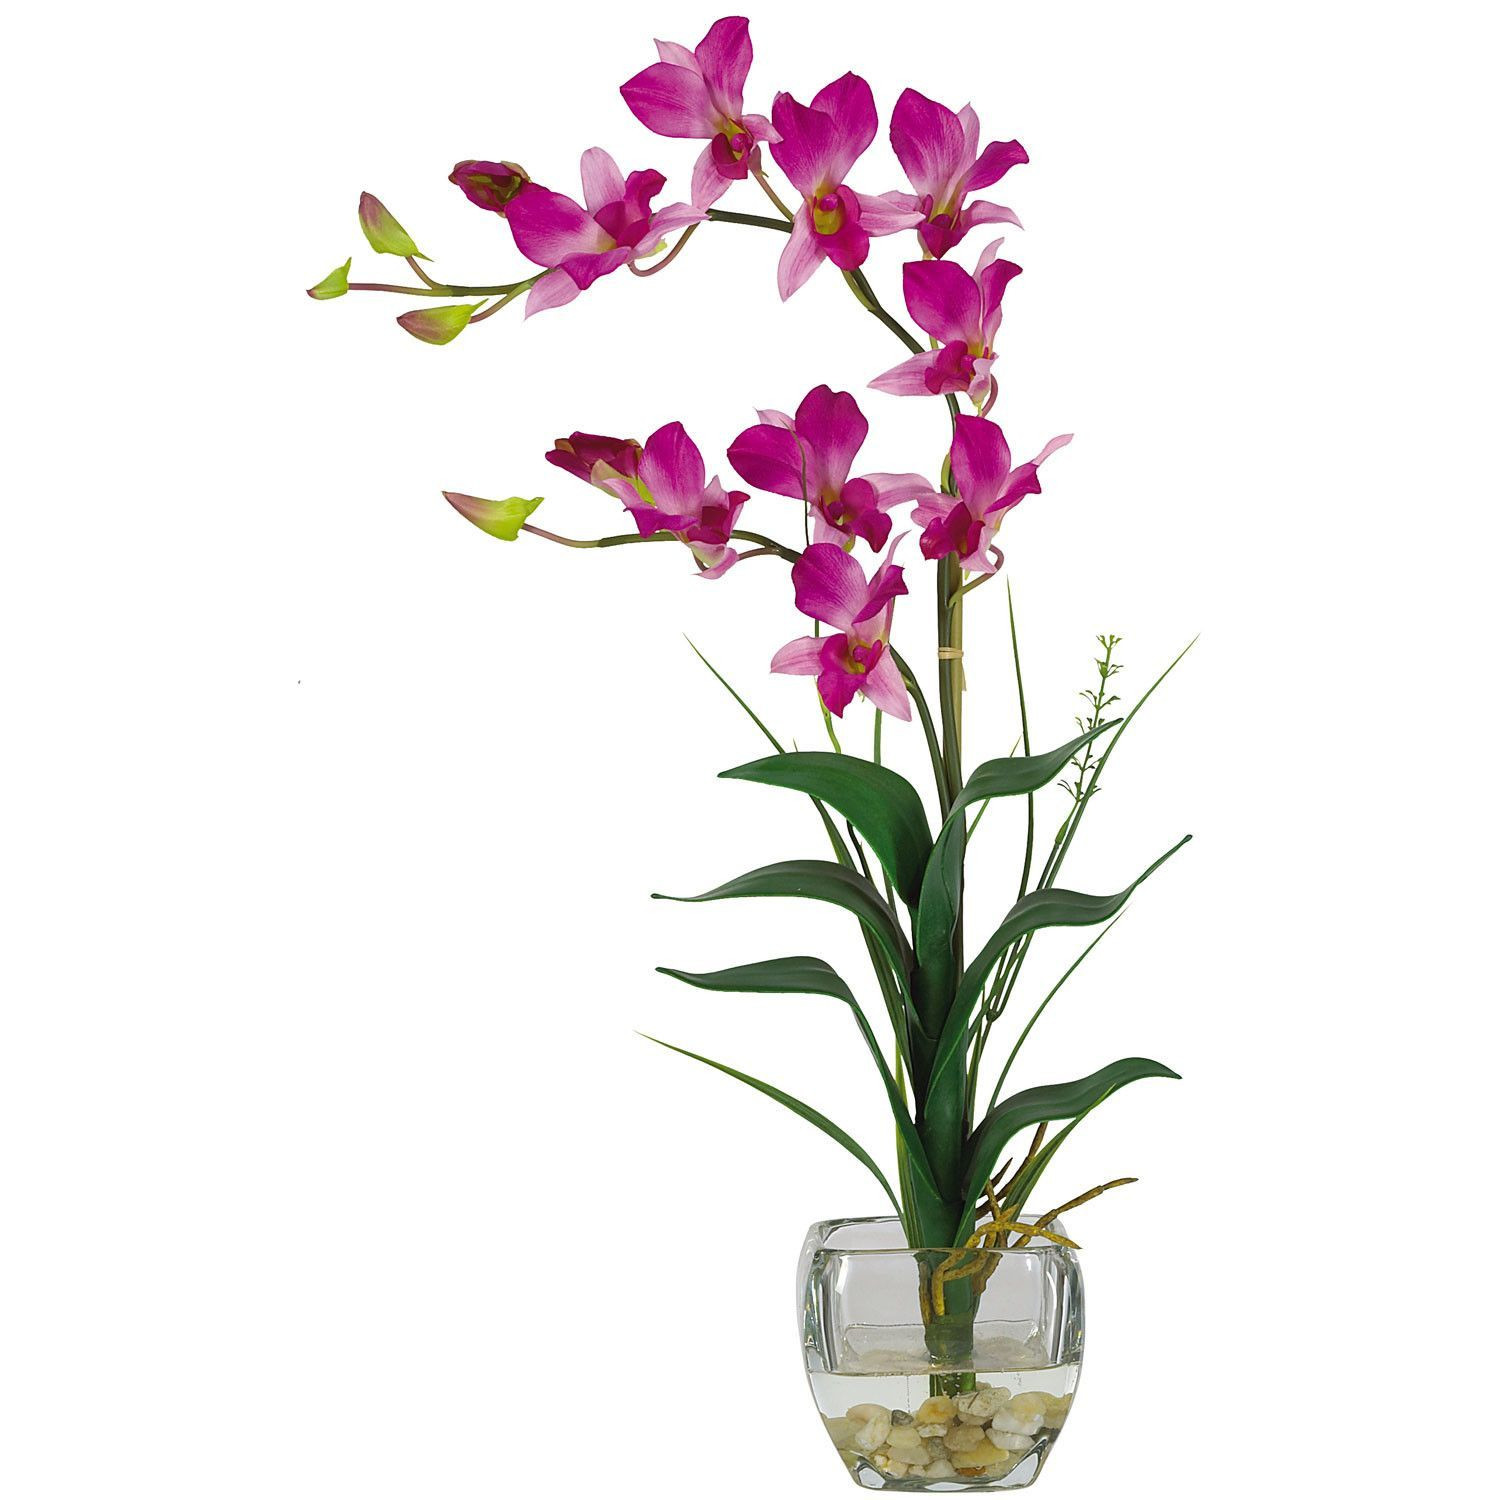 25 Stylish Purple orchid Vase 2024 free download purple orchid vase of dendrobium w glass vase silk flower arrangement products pertaining to dendrobium w glass vase silk flower arrangement